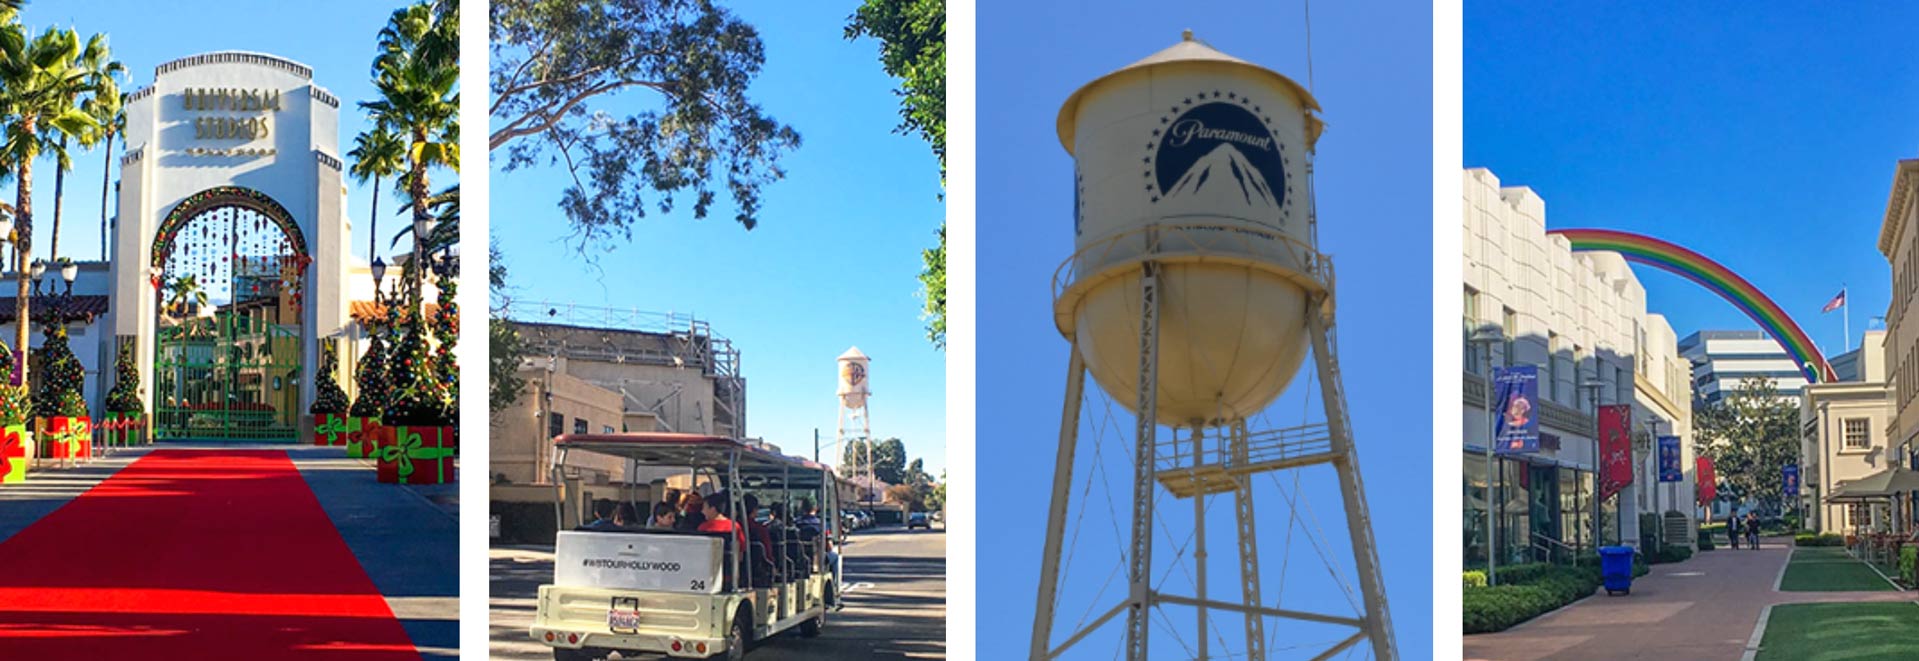 Hollywood Studio Tours Featured 